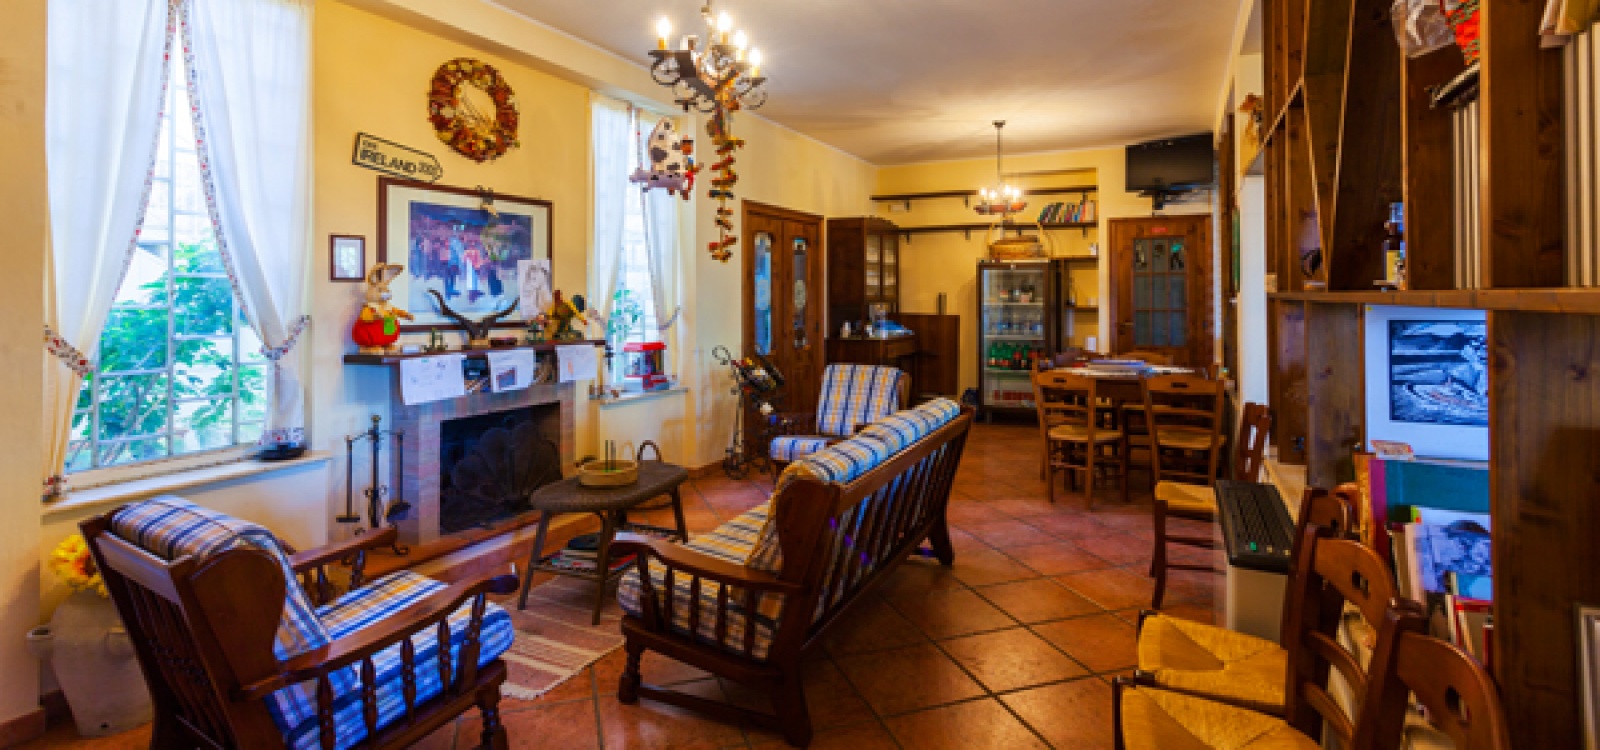 SP 14,Canicattini,96100,Bed and breakfast,SP 14,2160